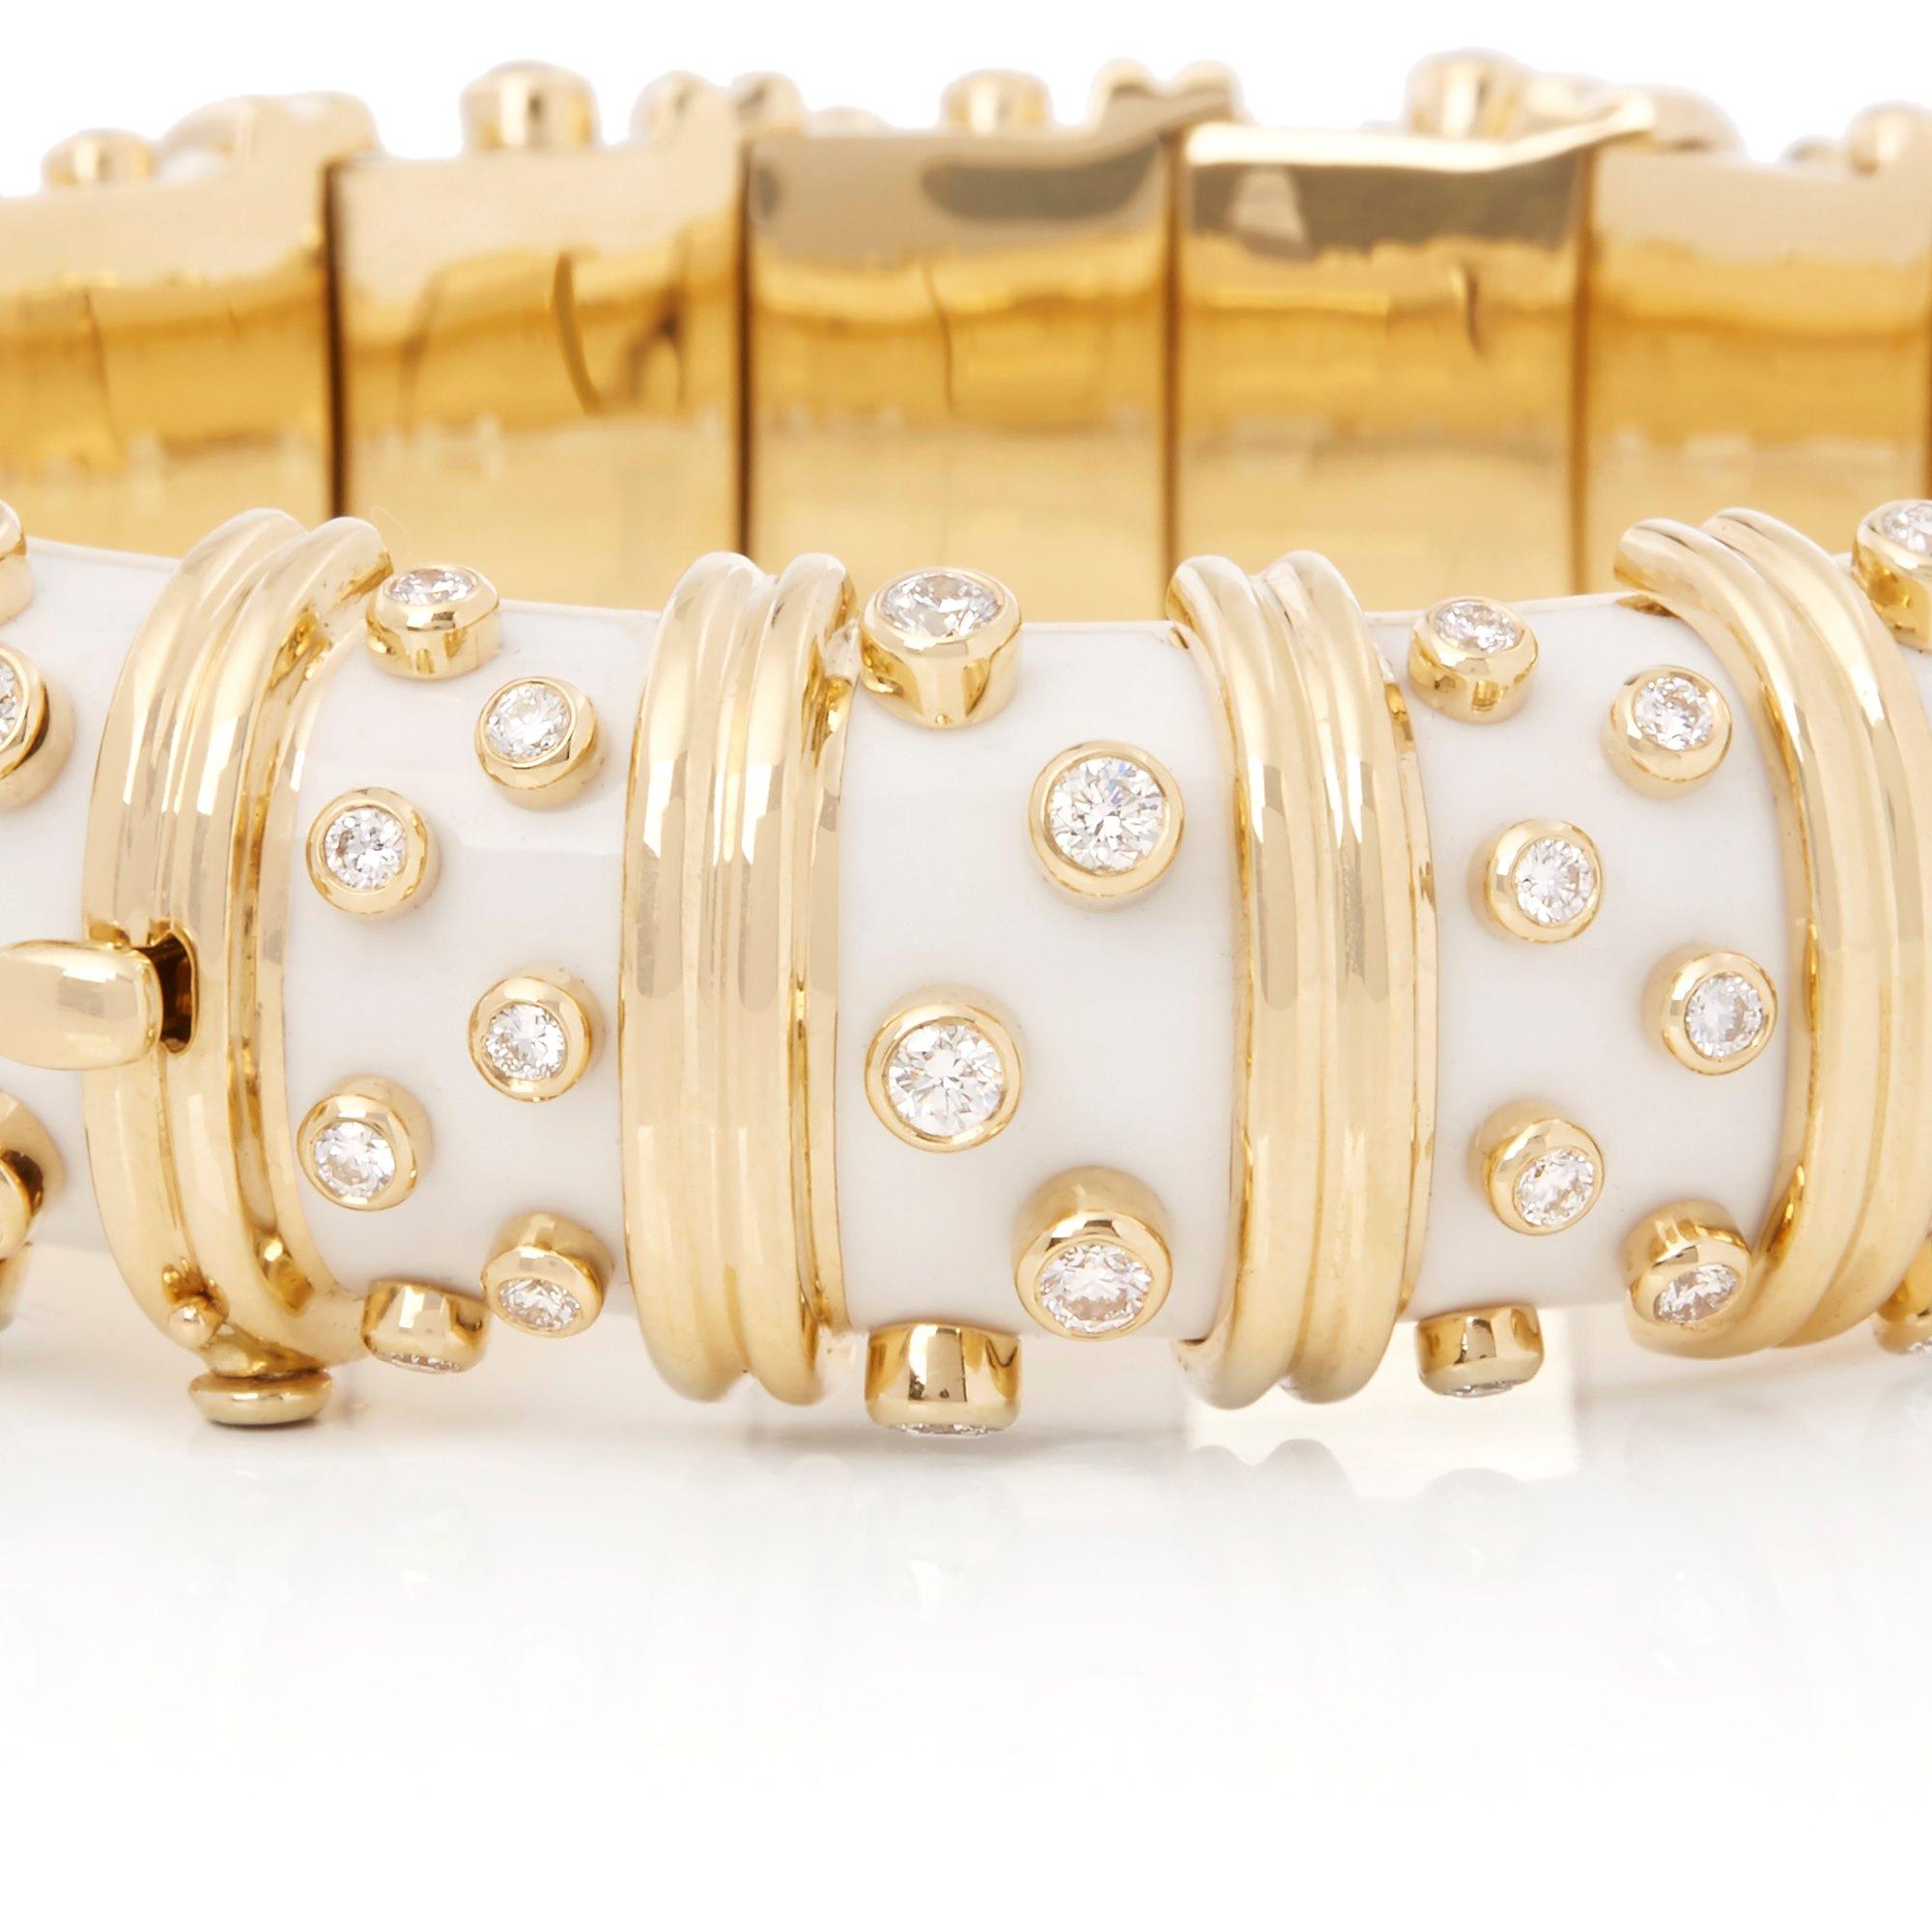 A DIAMOND AND WHITE ENAMEL BANGLE BRACELET, BY JEAN SCHLUMBERGER, TIFFANY & CO.
Designed as a white paillonné enamel hinged bangle, decorated with collet-set diamonds and sculpted gold vertical bands, 6 3/4 ins. inner diameter, mounted in platinum